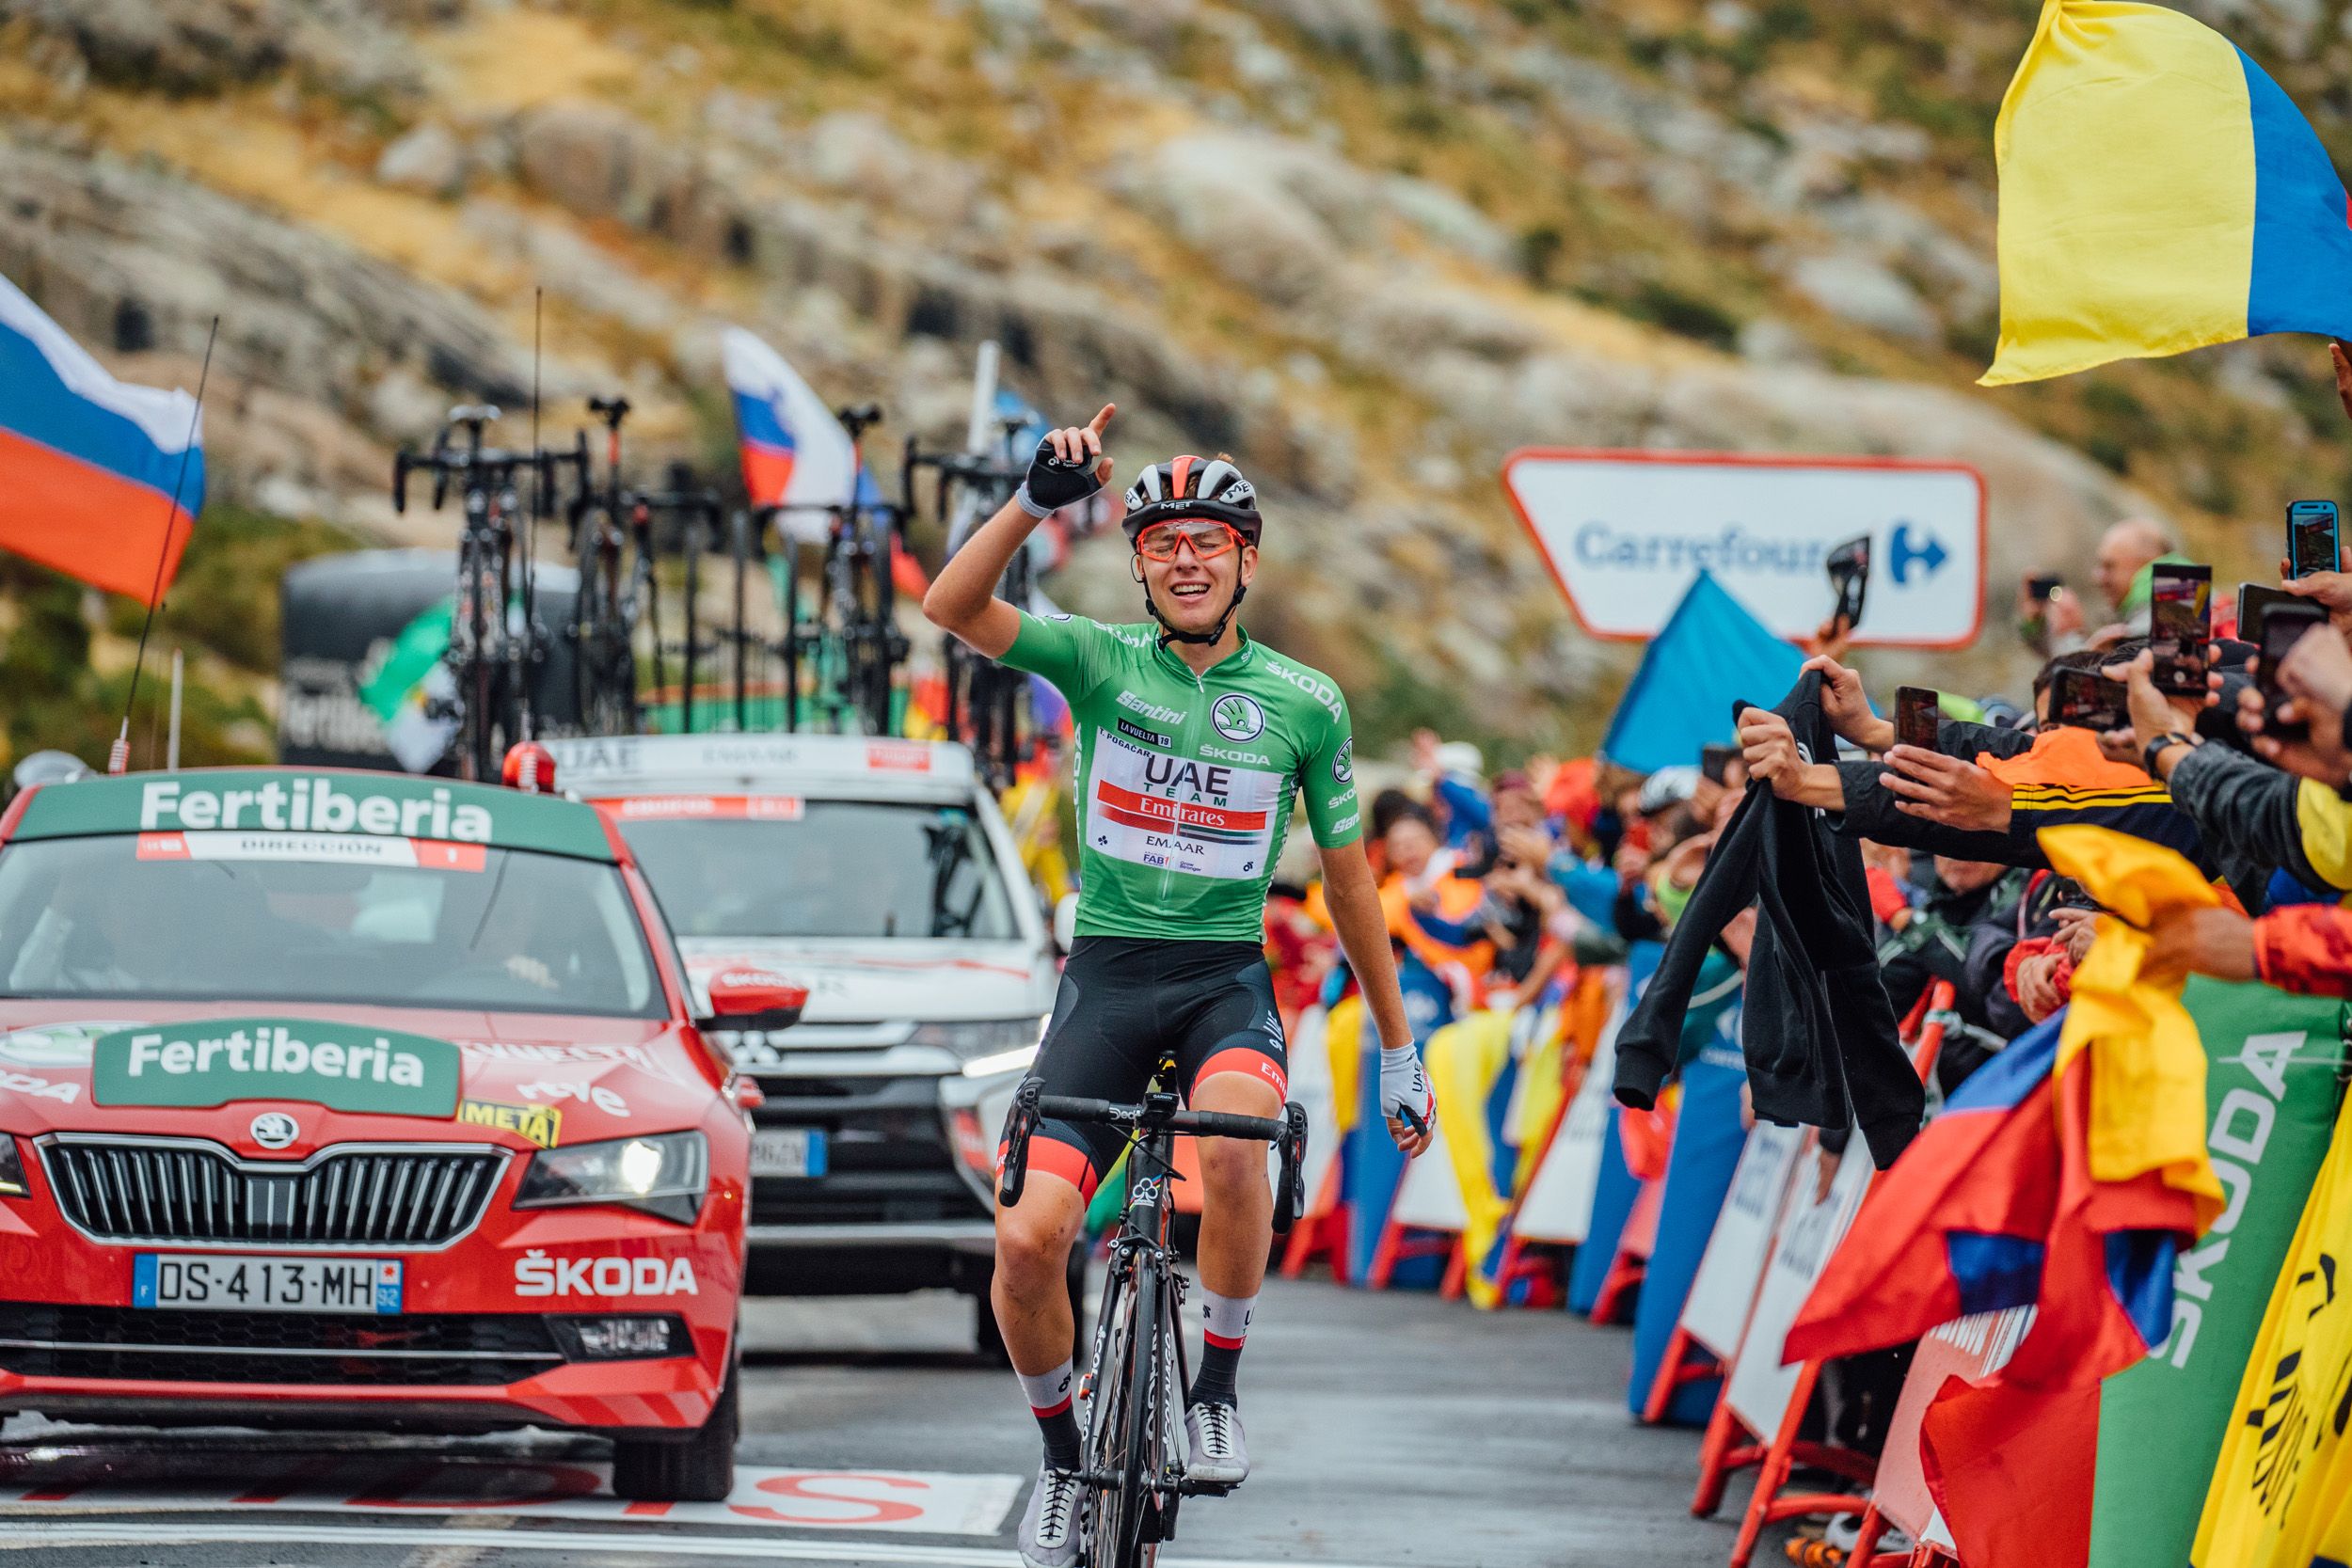 Pogačar celebrates winning stage 20 of the 2019 Vuelta. At 20, he was the youngest rider in the race.